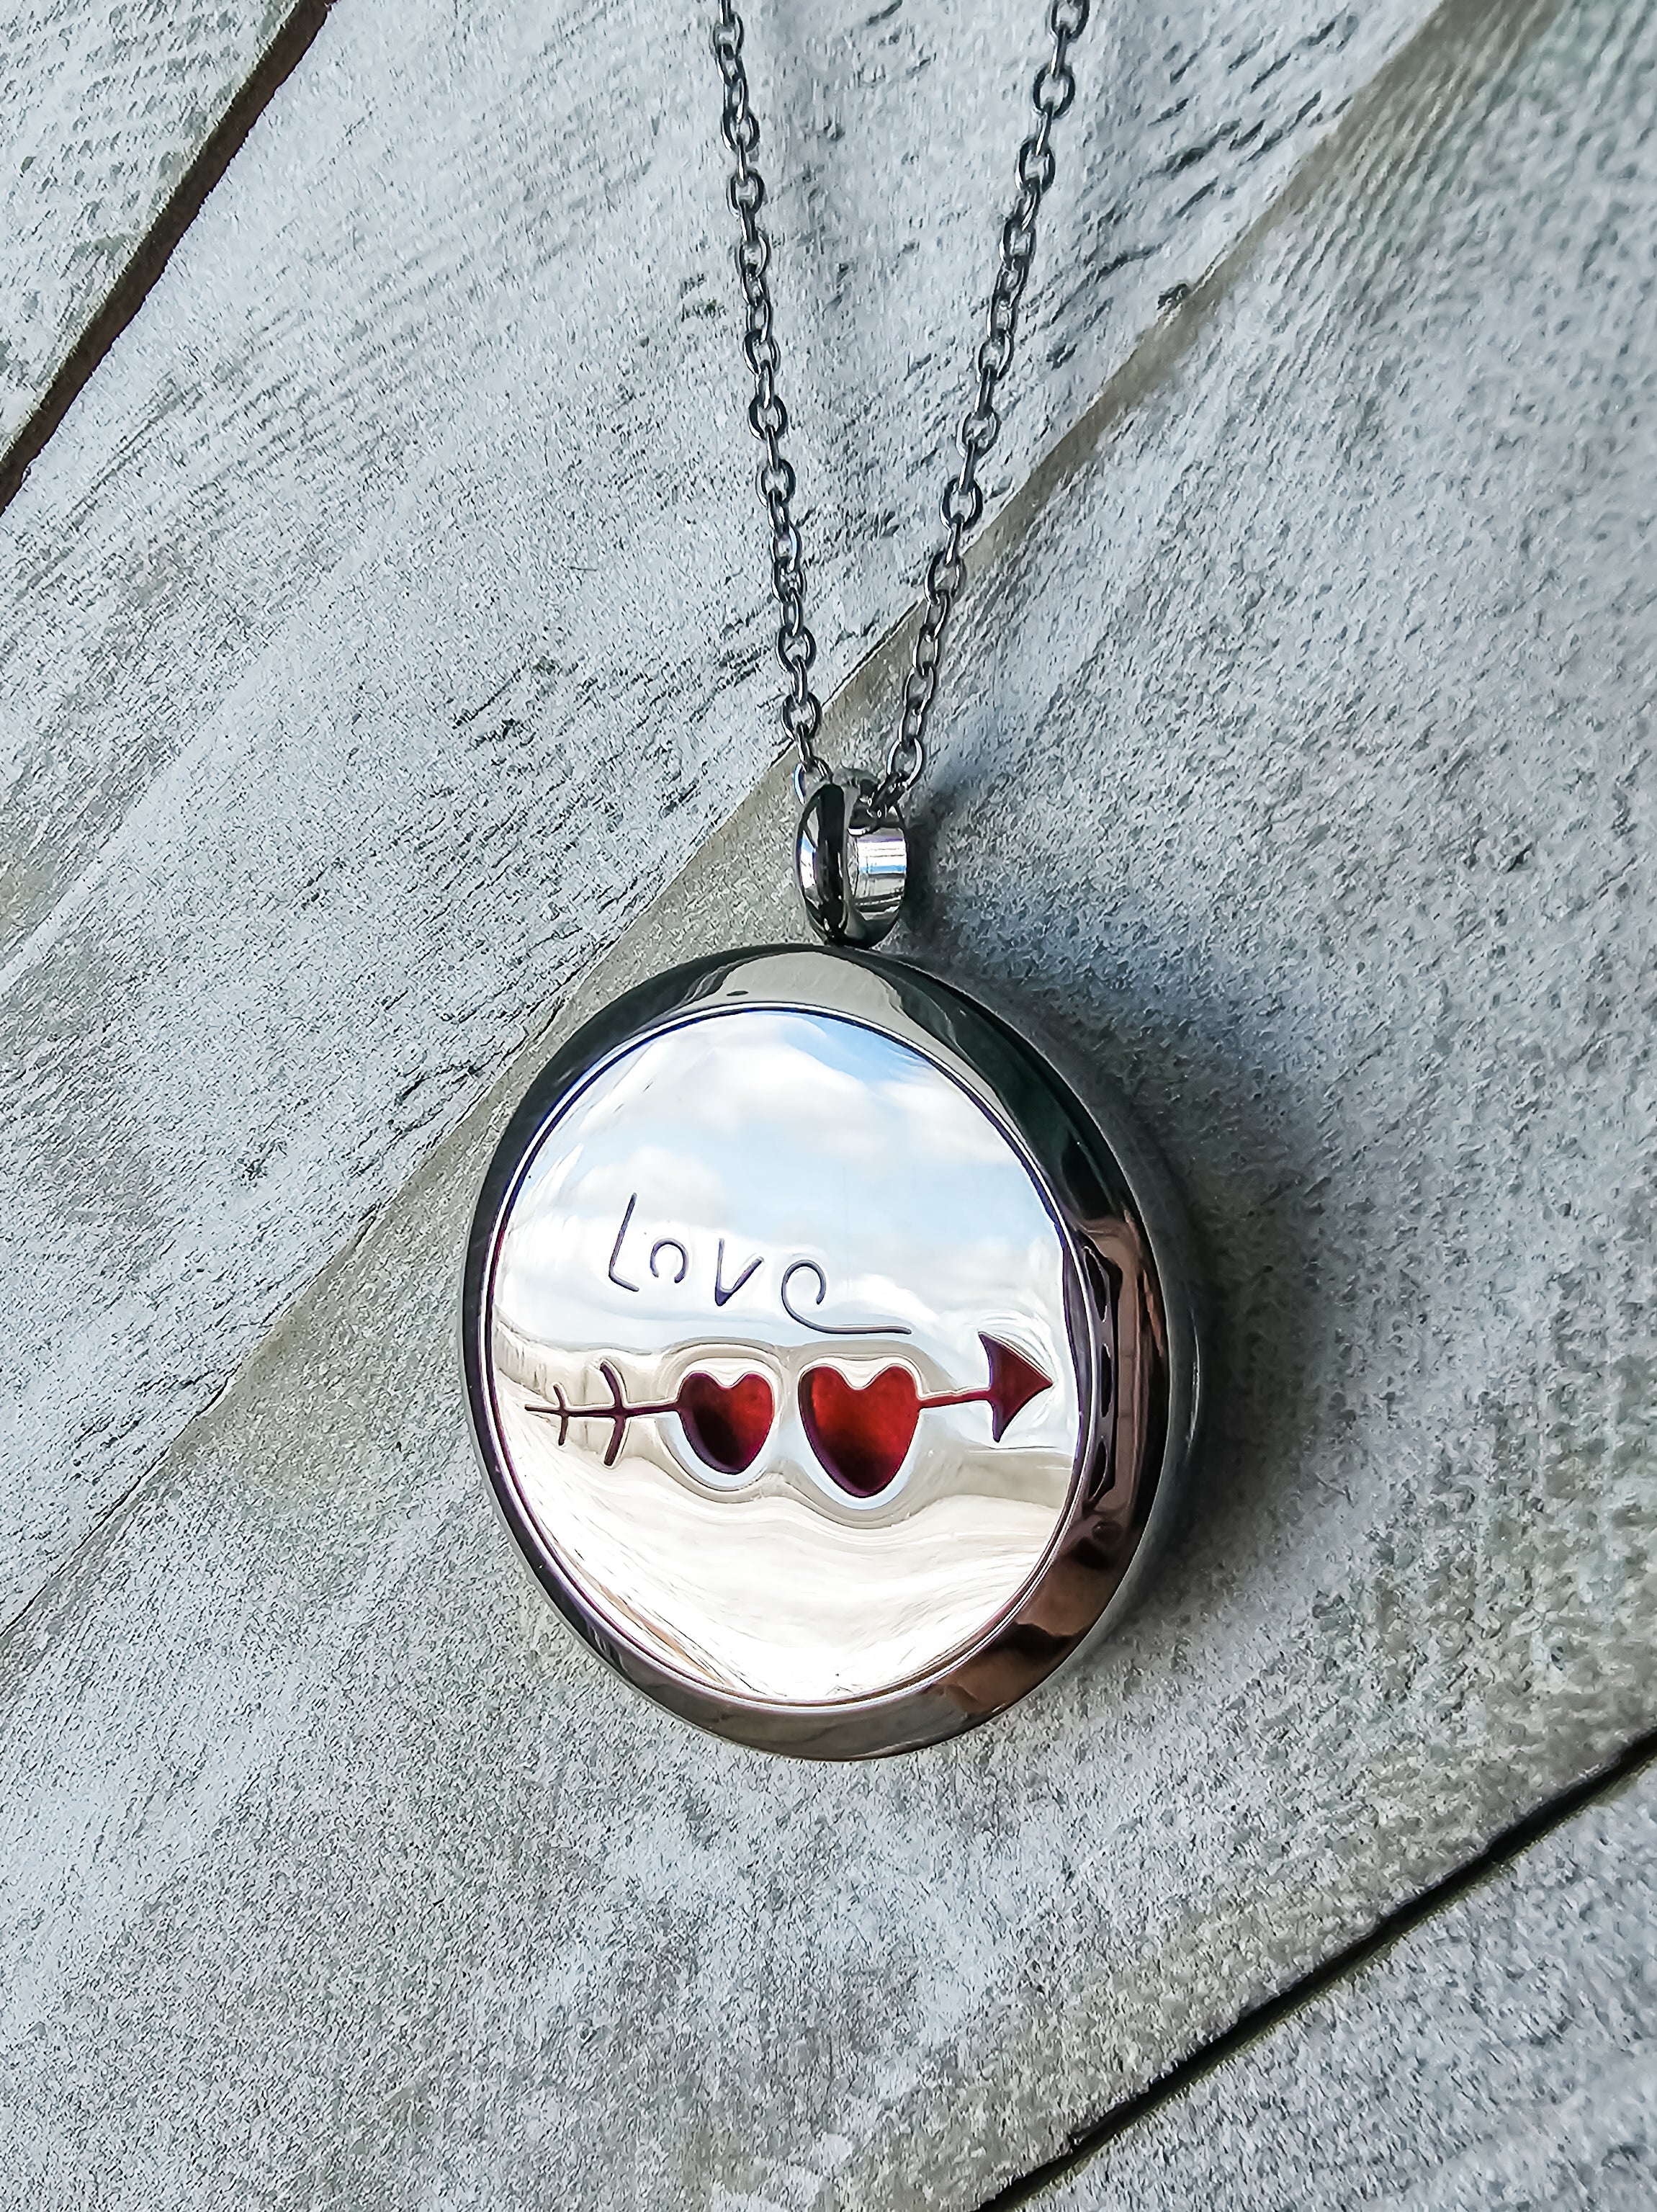 Aromatherapy - LOVE, Diffuser Pendant Necklace